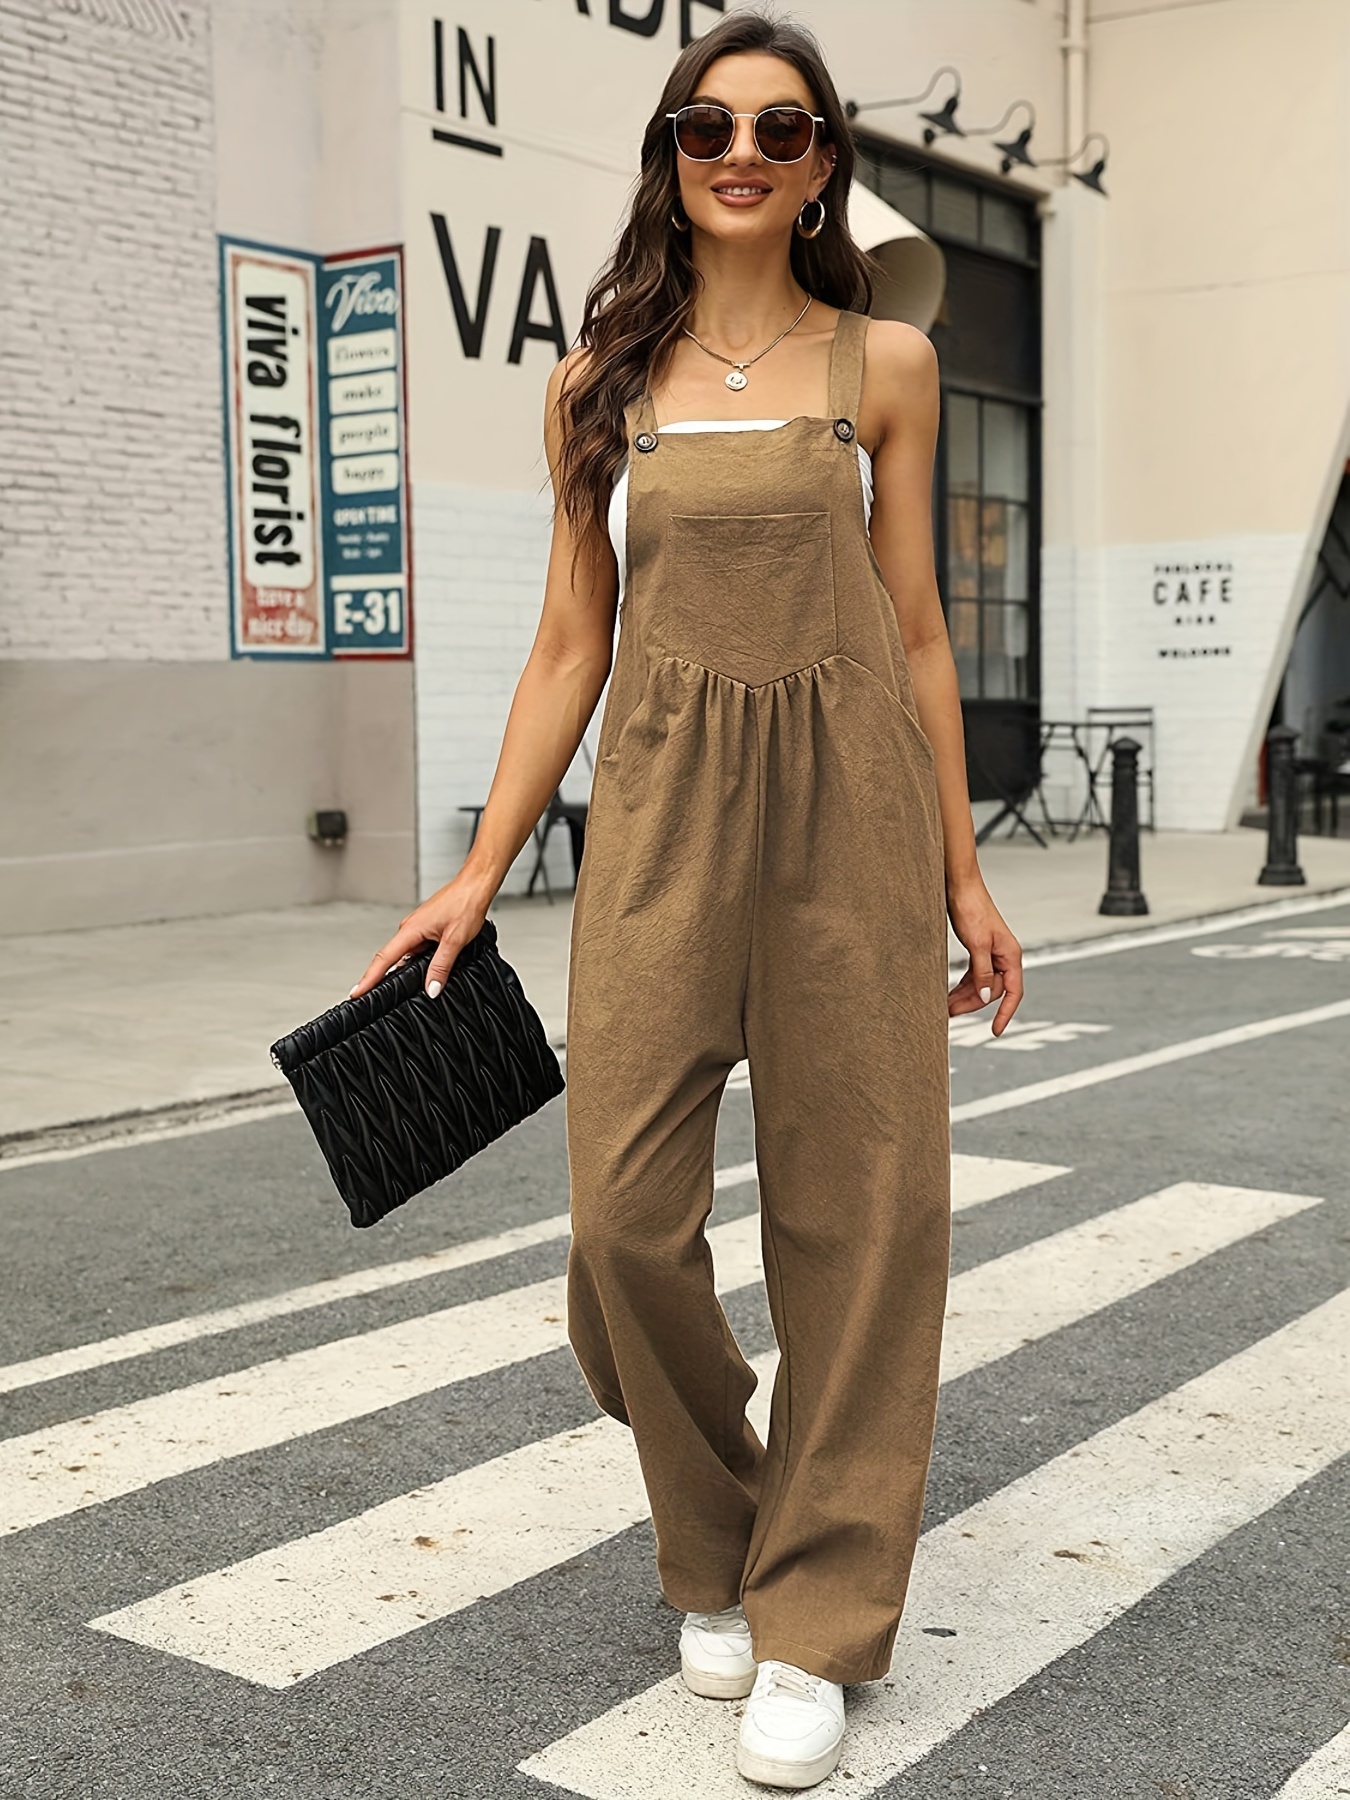 HERE&NOW Women's Solid Jump Suit Dress Sleeveless Casual Strappy Summer  Wear Slip On Attched Top And Bottom Set 